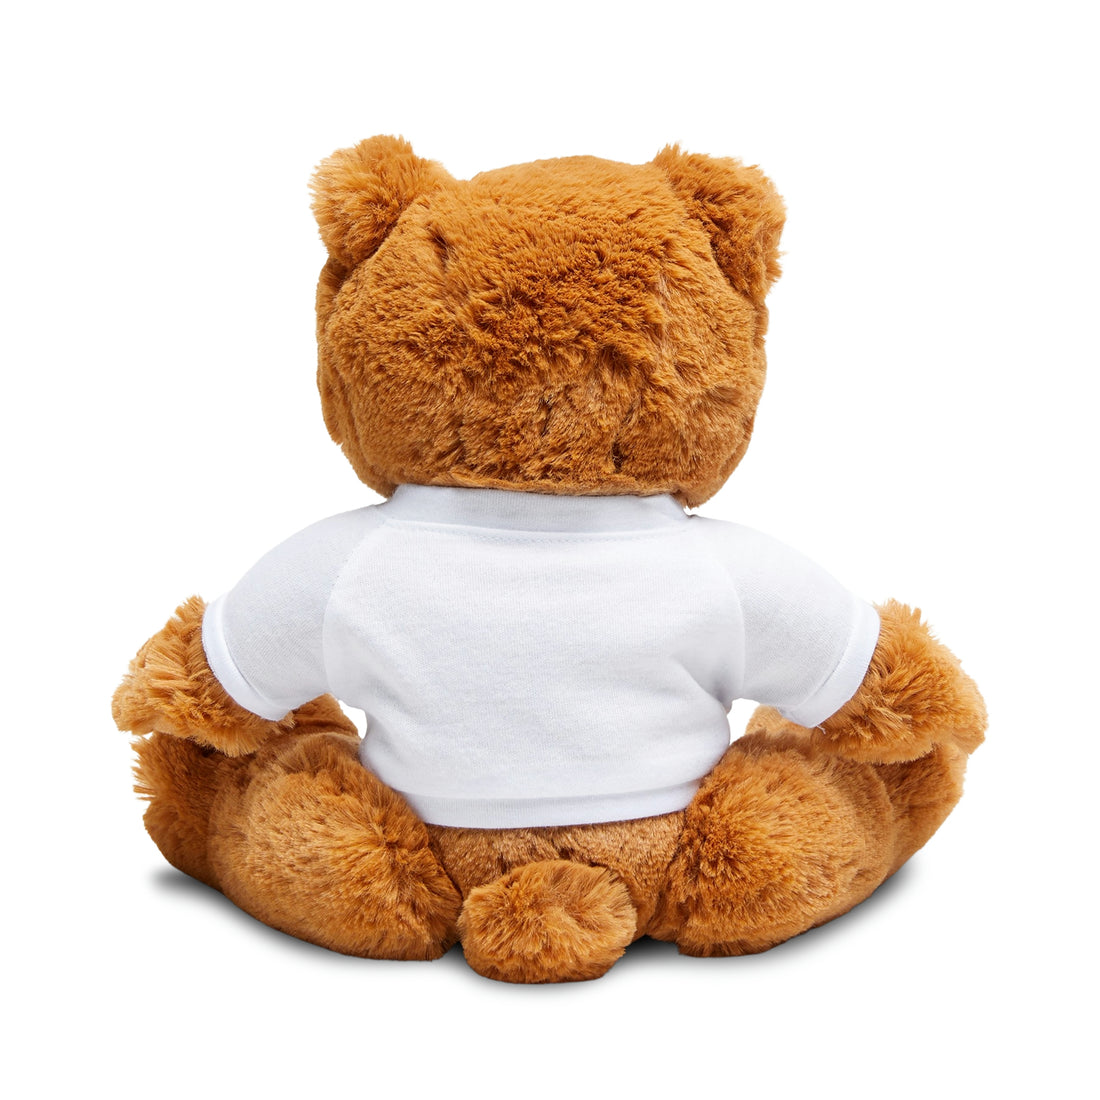 TCoU-Take Care of You -- Teddy Bear with T-Shirt